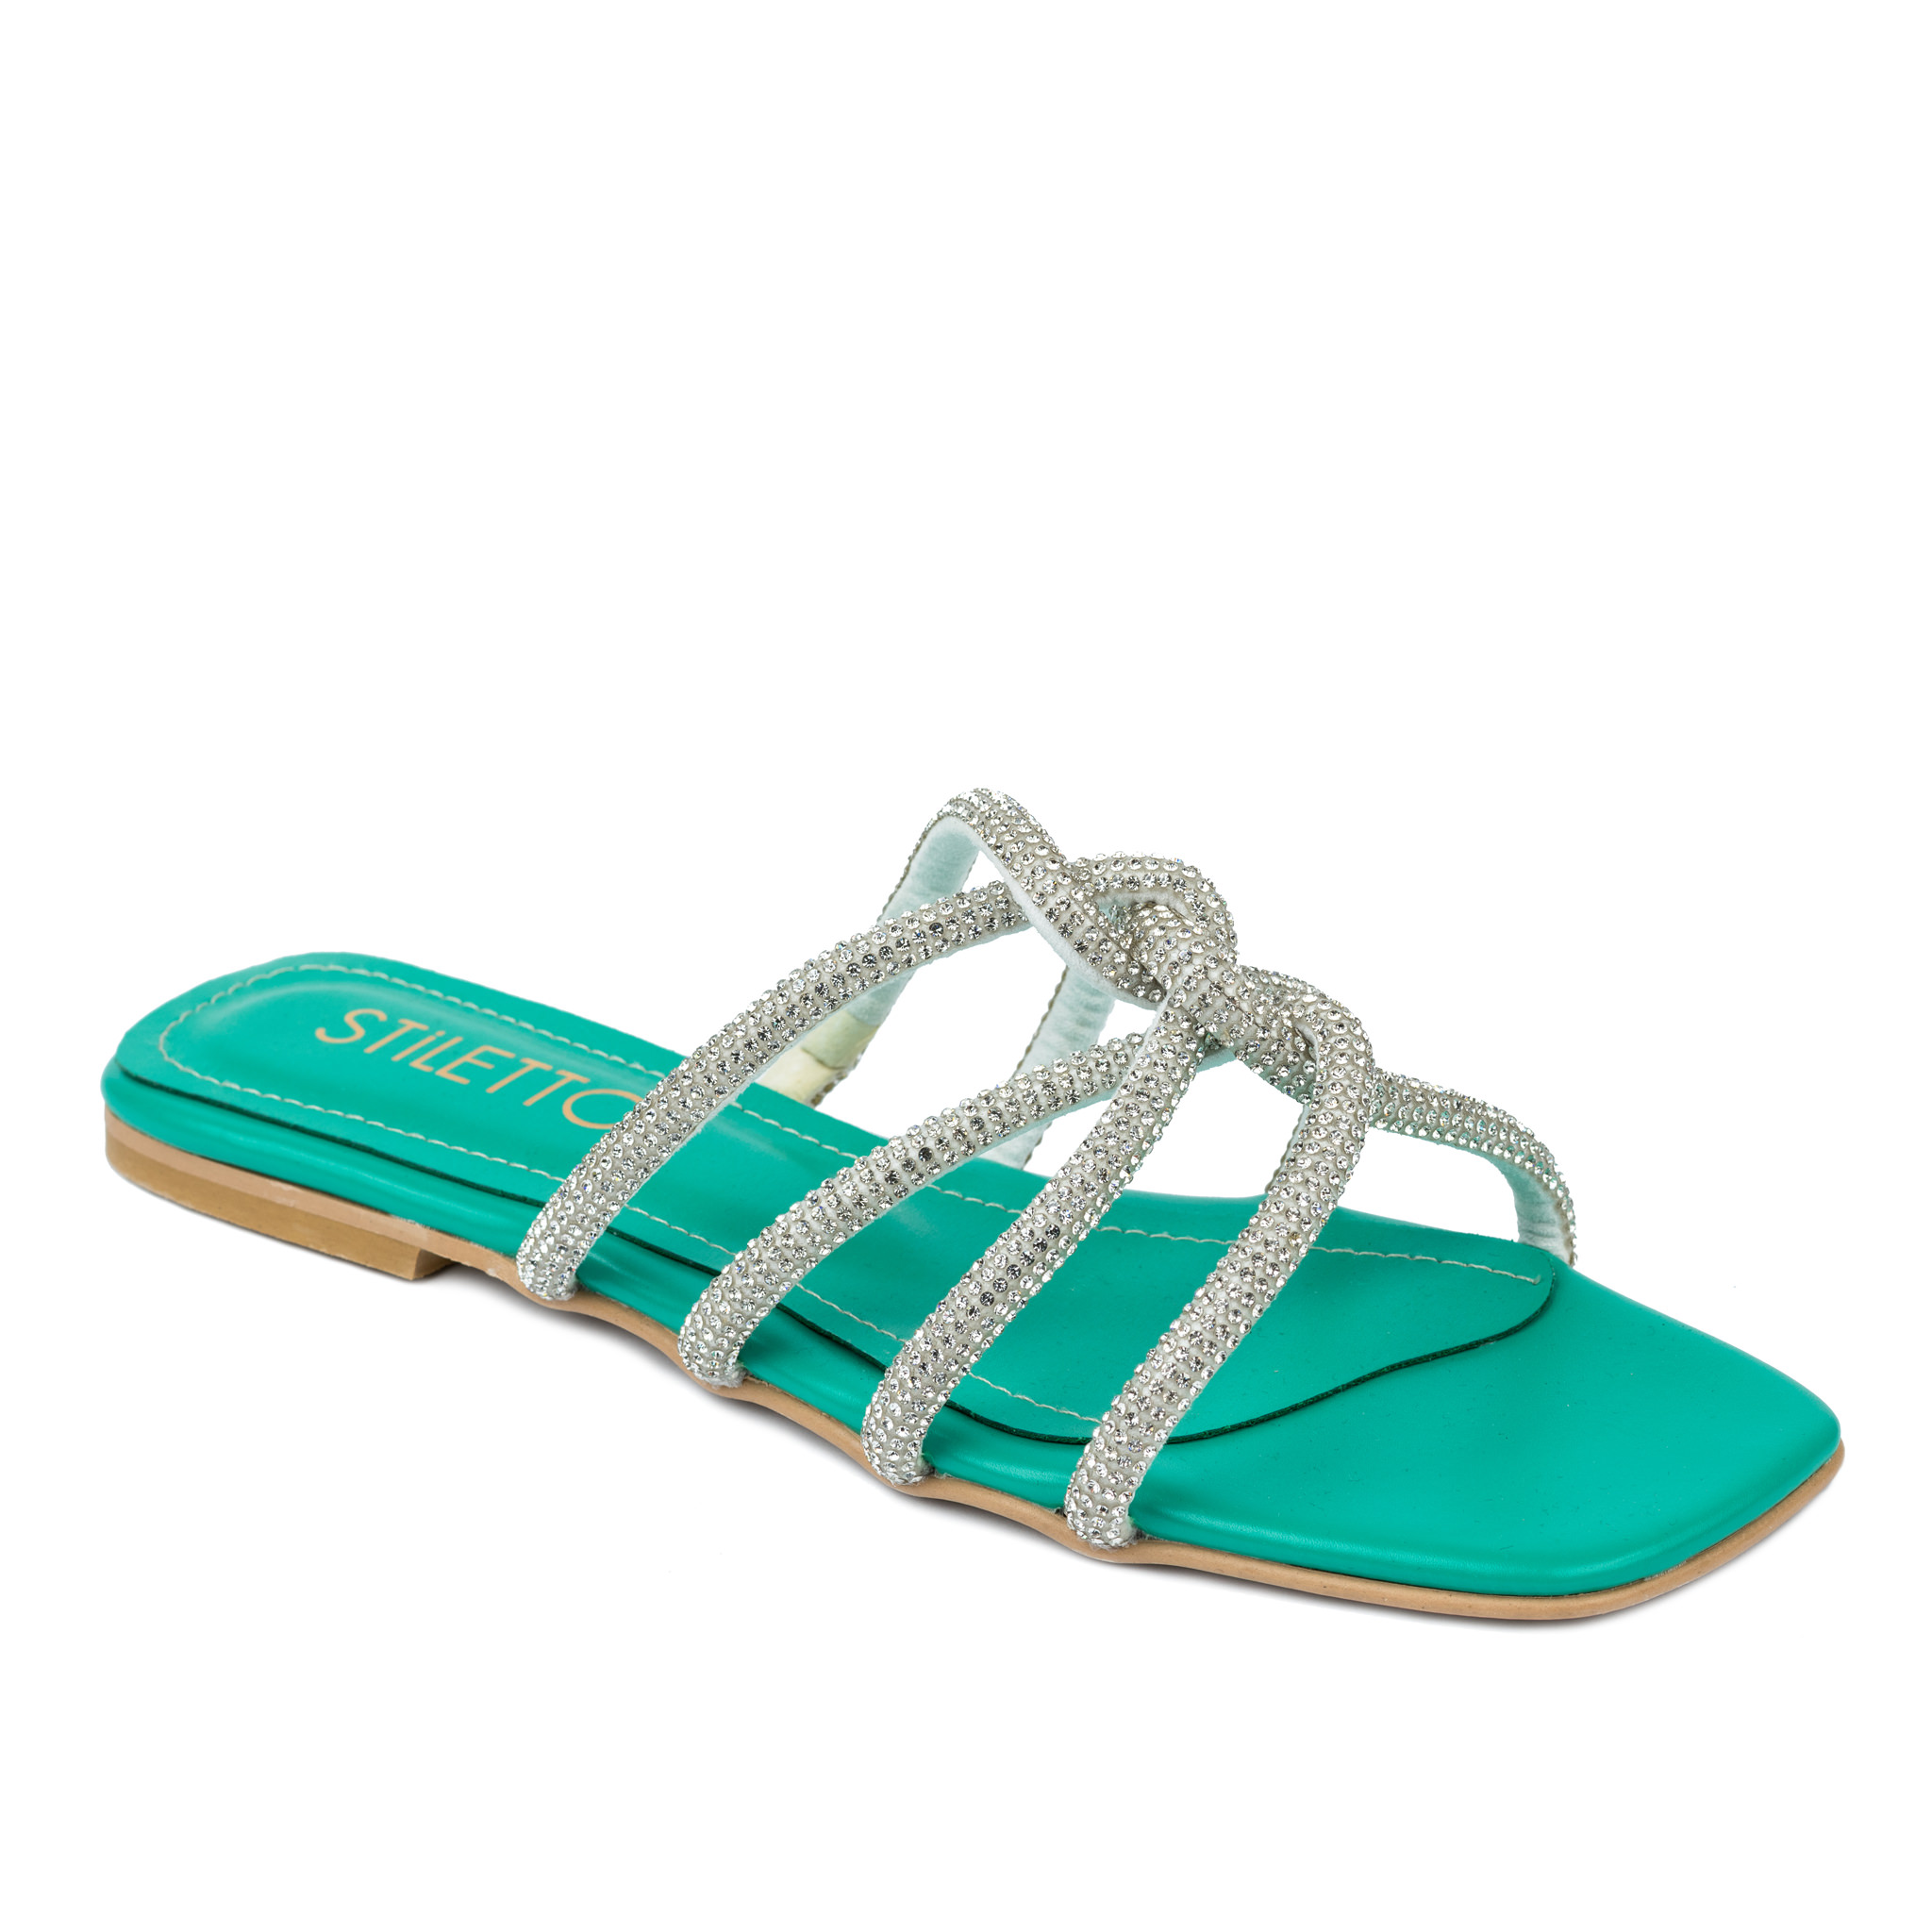 Women Slippers and Mules A434 - TURQUOISE